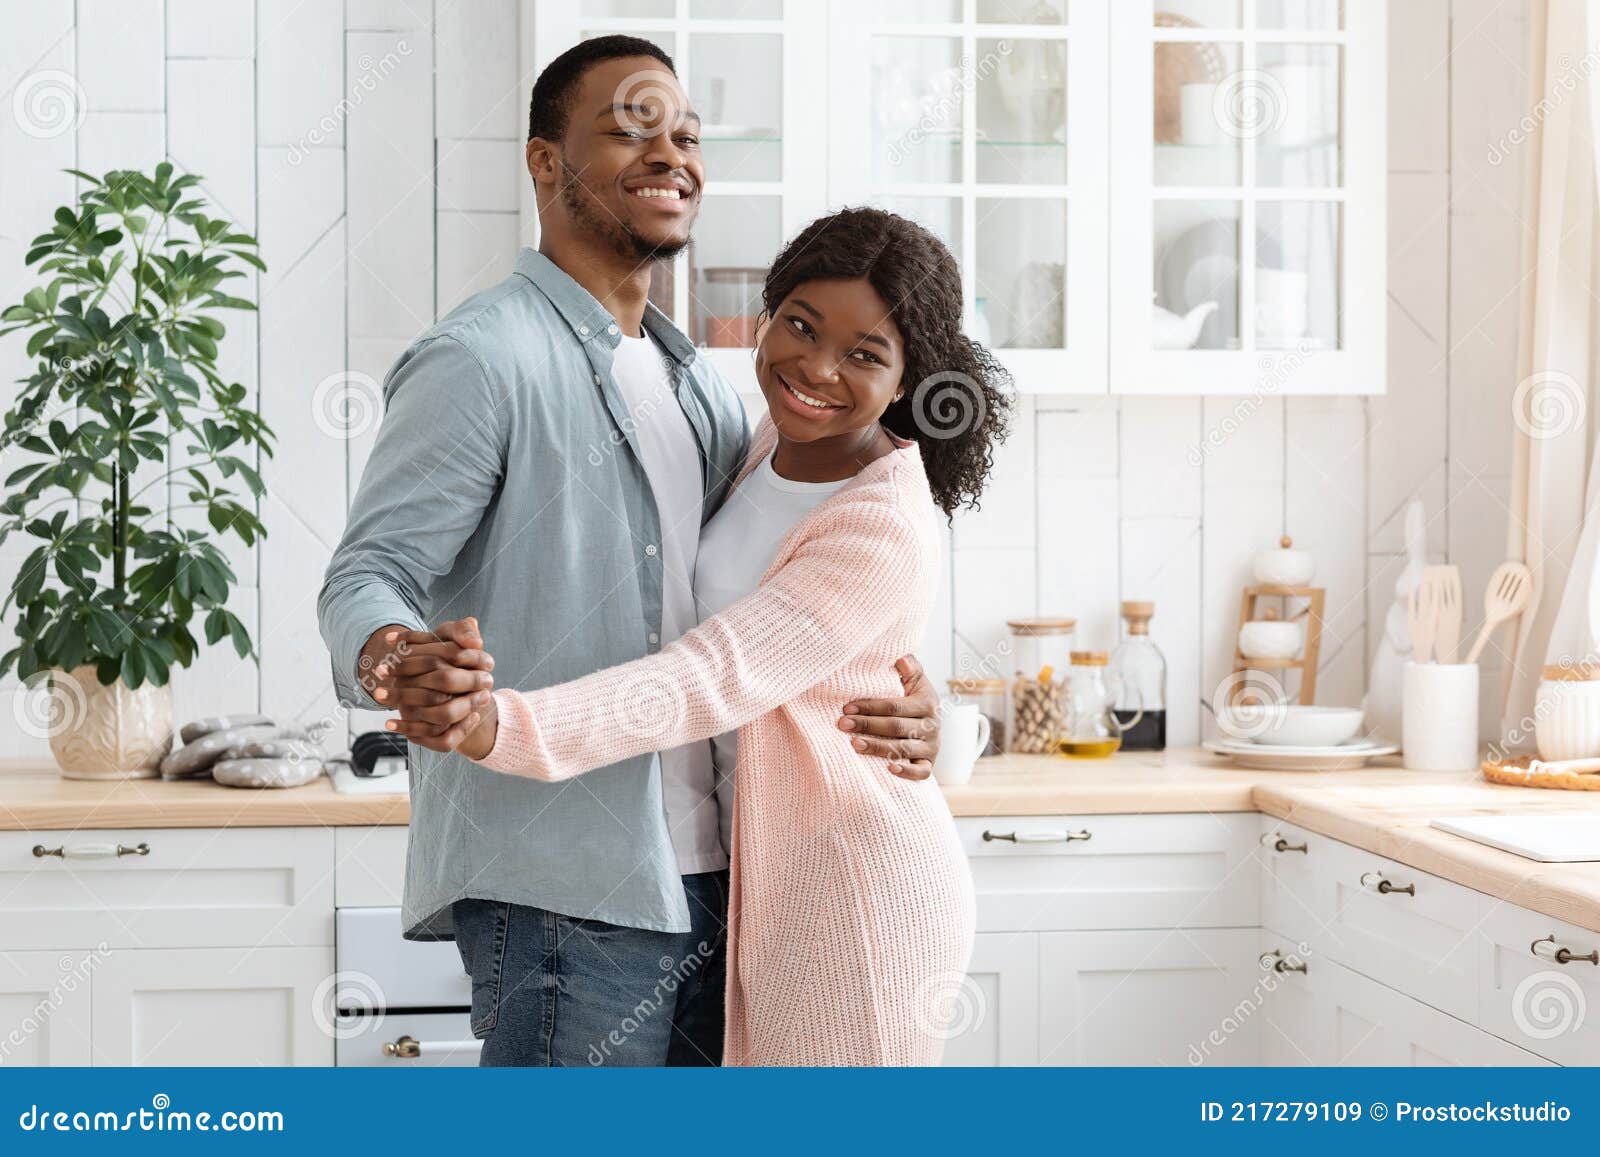 Affectionate Black Spouses Having Fun At Home Dancing In Kitchen Stock Image Image Of Date